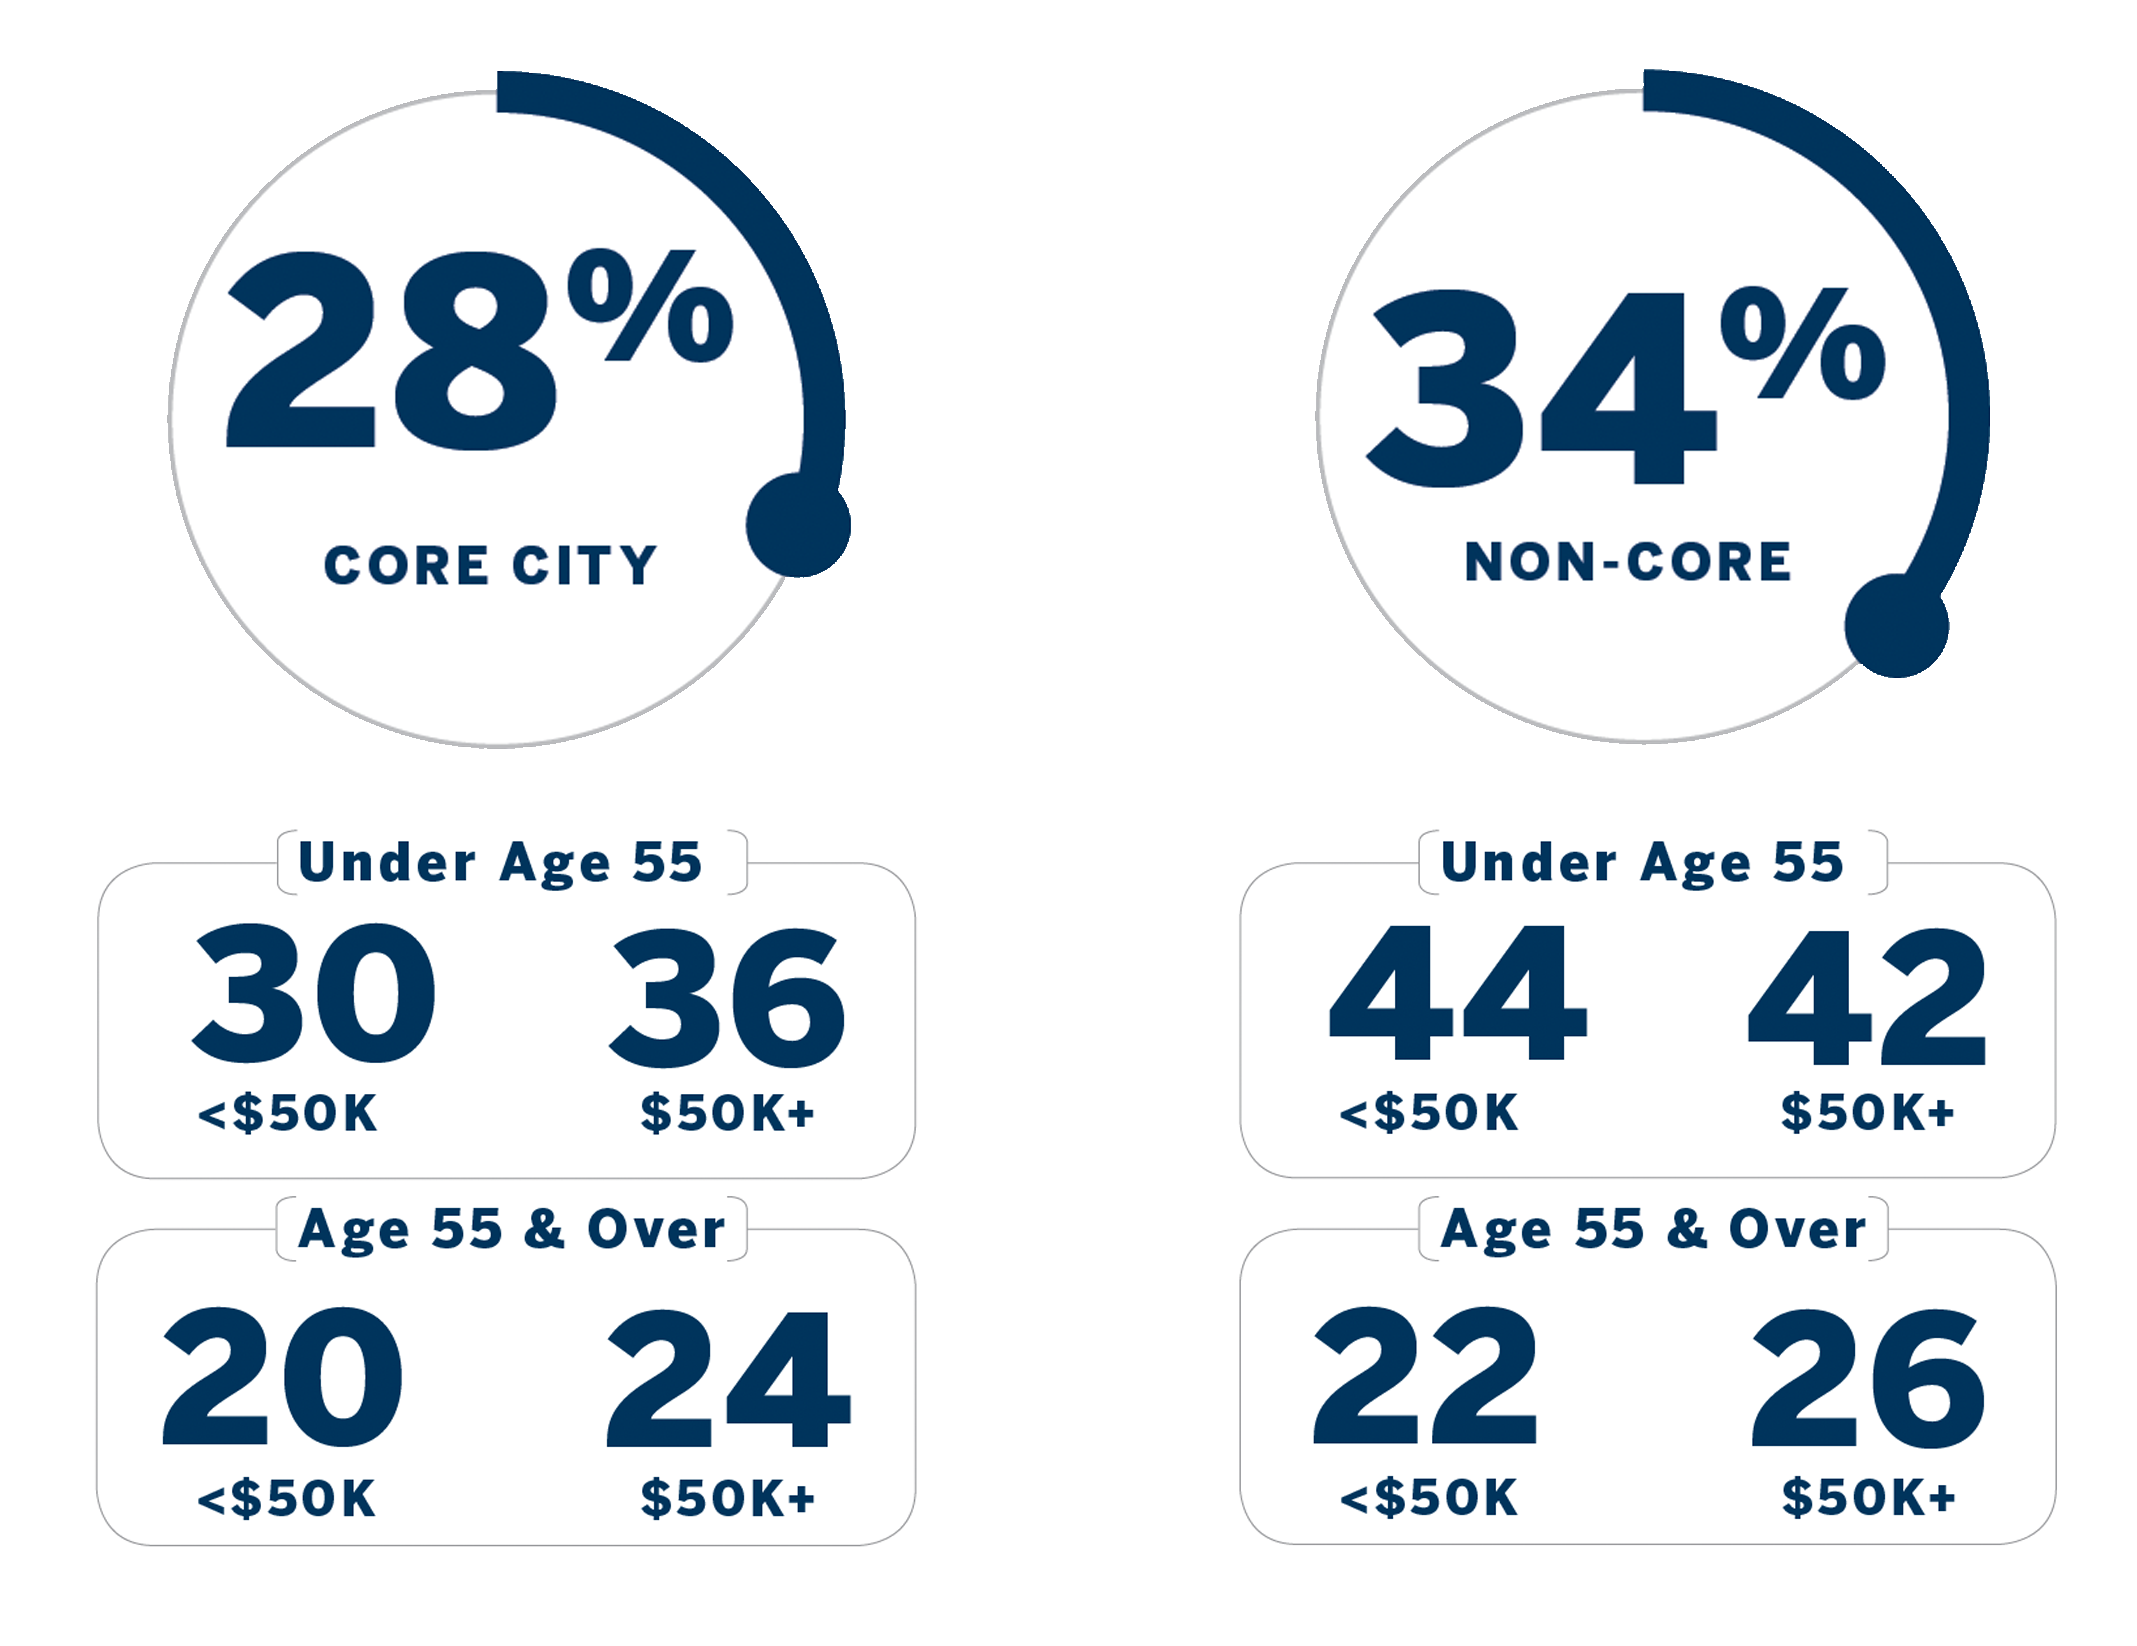 Chart breakdown: Core City: 28% (broken down by ages less than and over 55) Non-Core: 34% (broken down by ages less than and over 55)